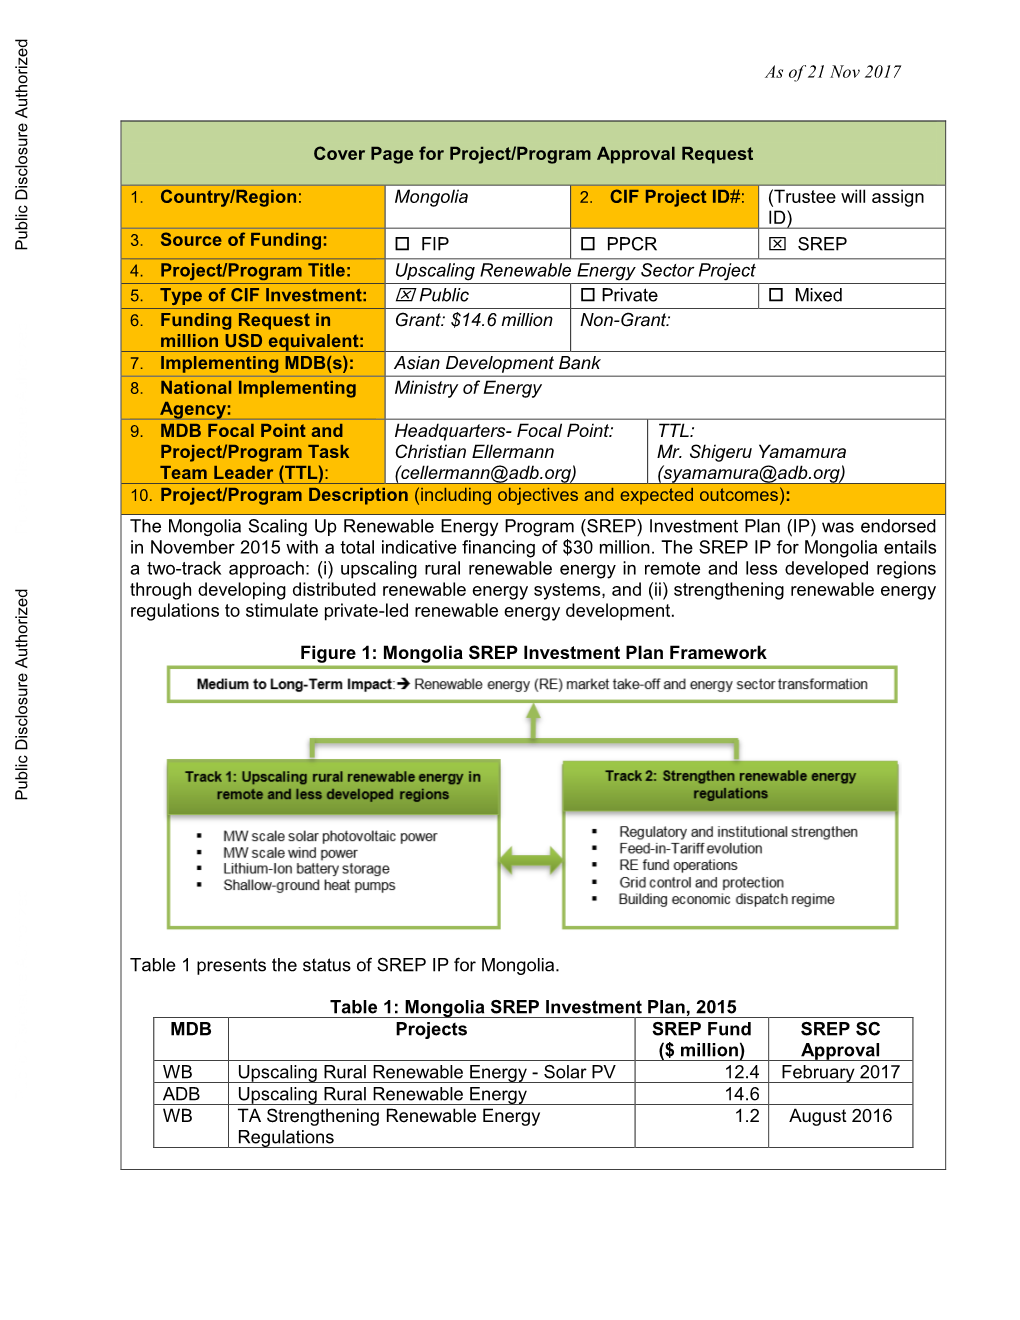 As of 21 Nov 2017 Cover Page for Project/Program Approval Request